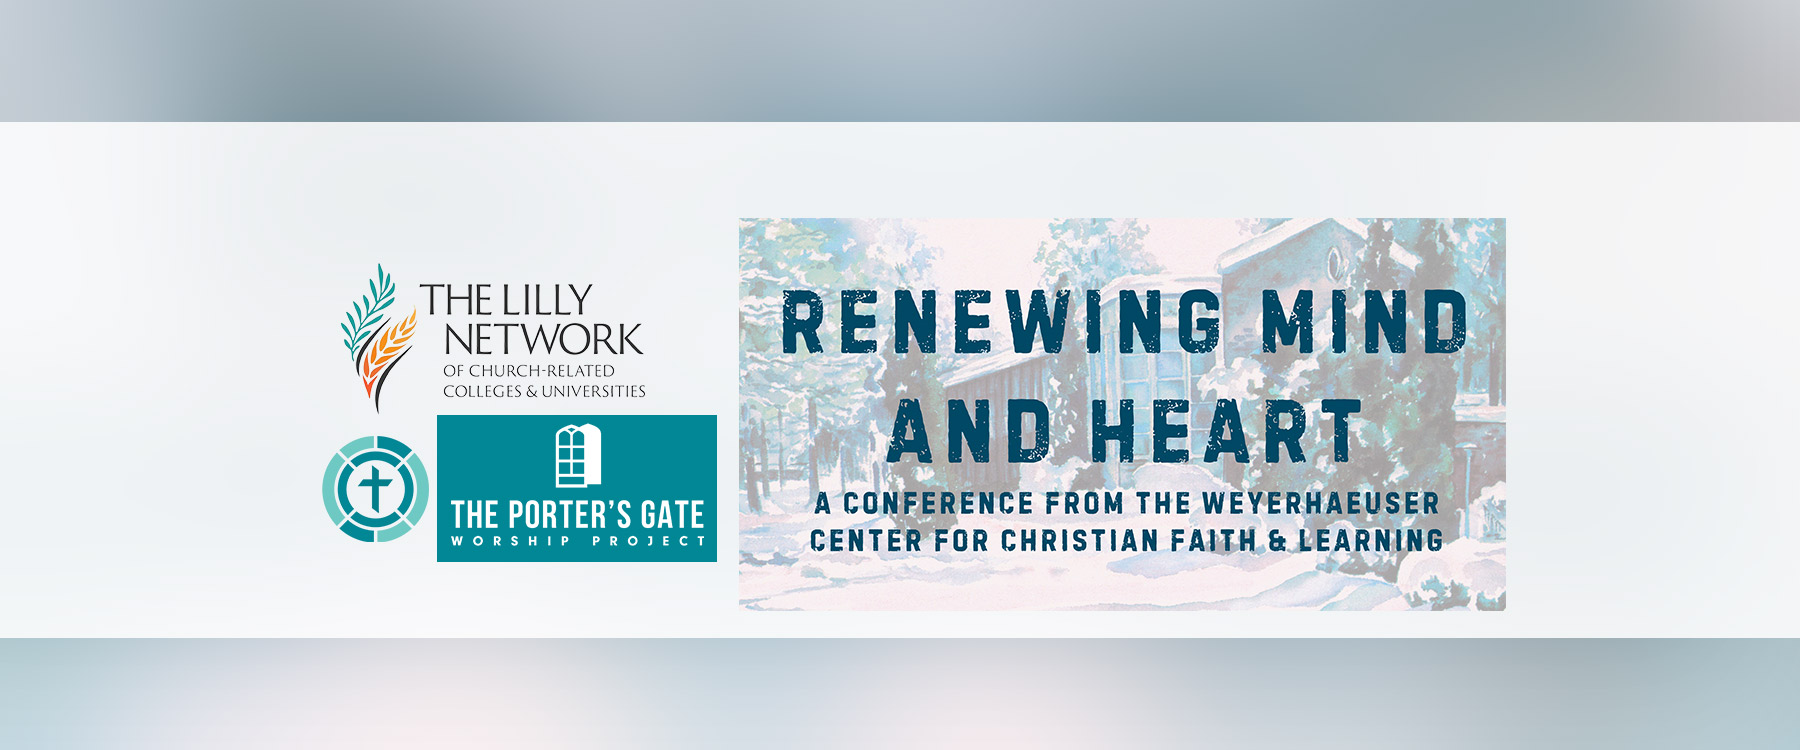 Renewing Mind and Heart - A Conference from the Weyerhaeuser Center for Christian Faith & Learning